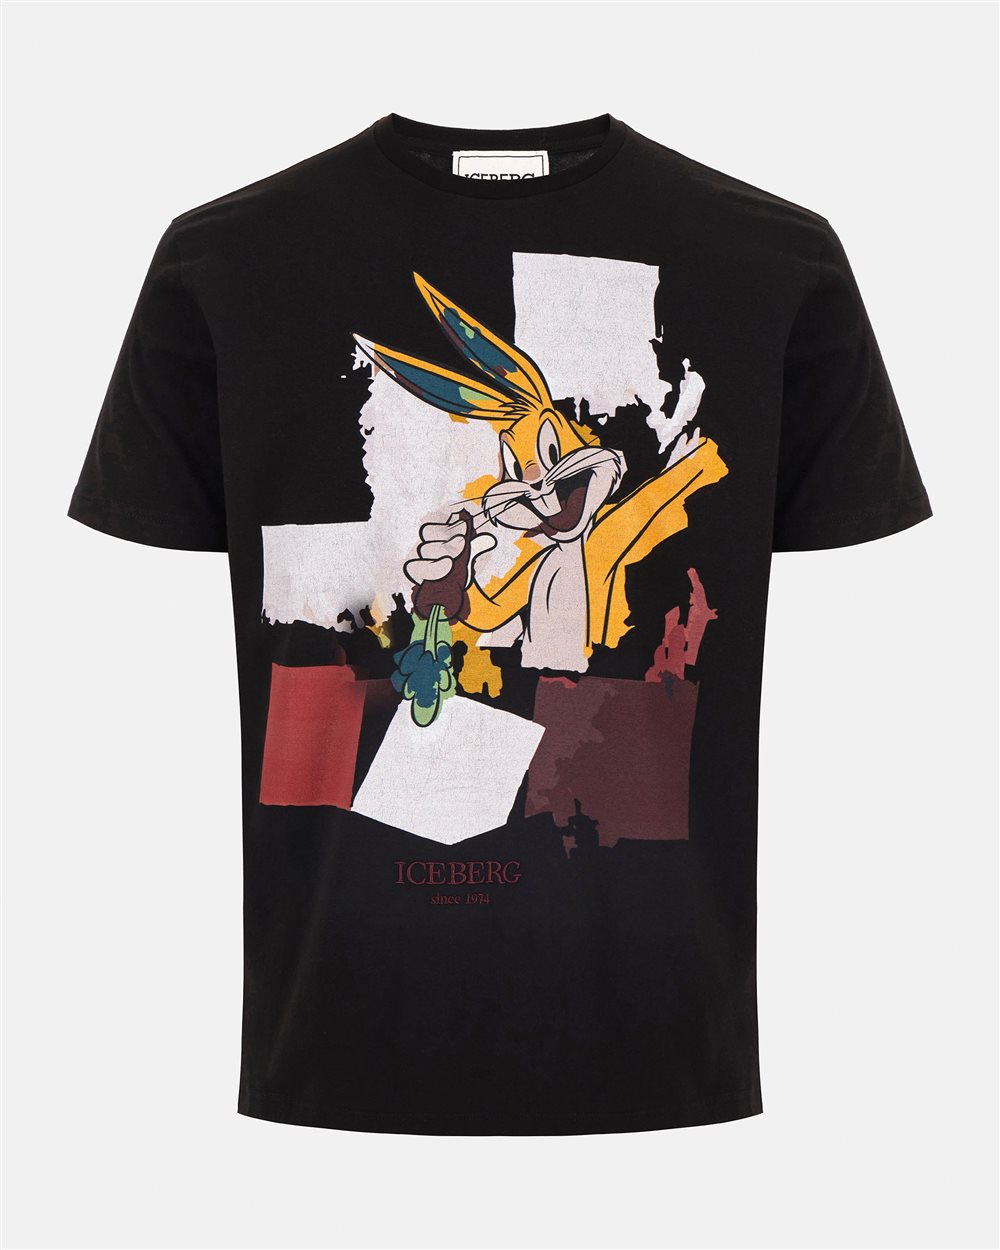 Black T-shirt with cartoon graphic - Iceberg - Official Website